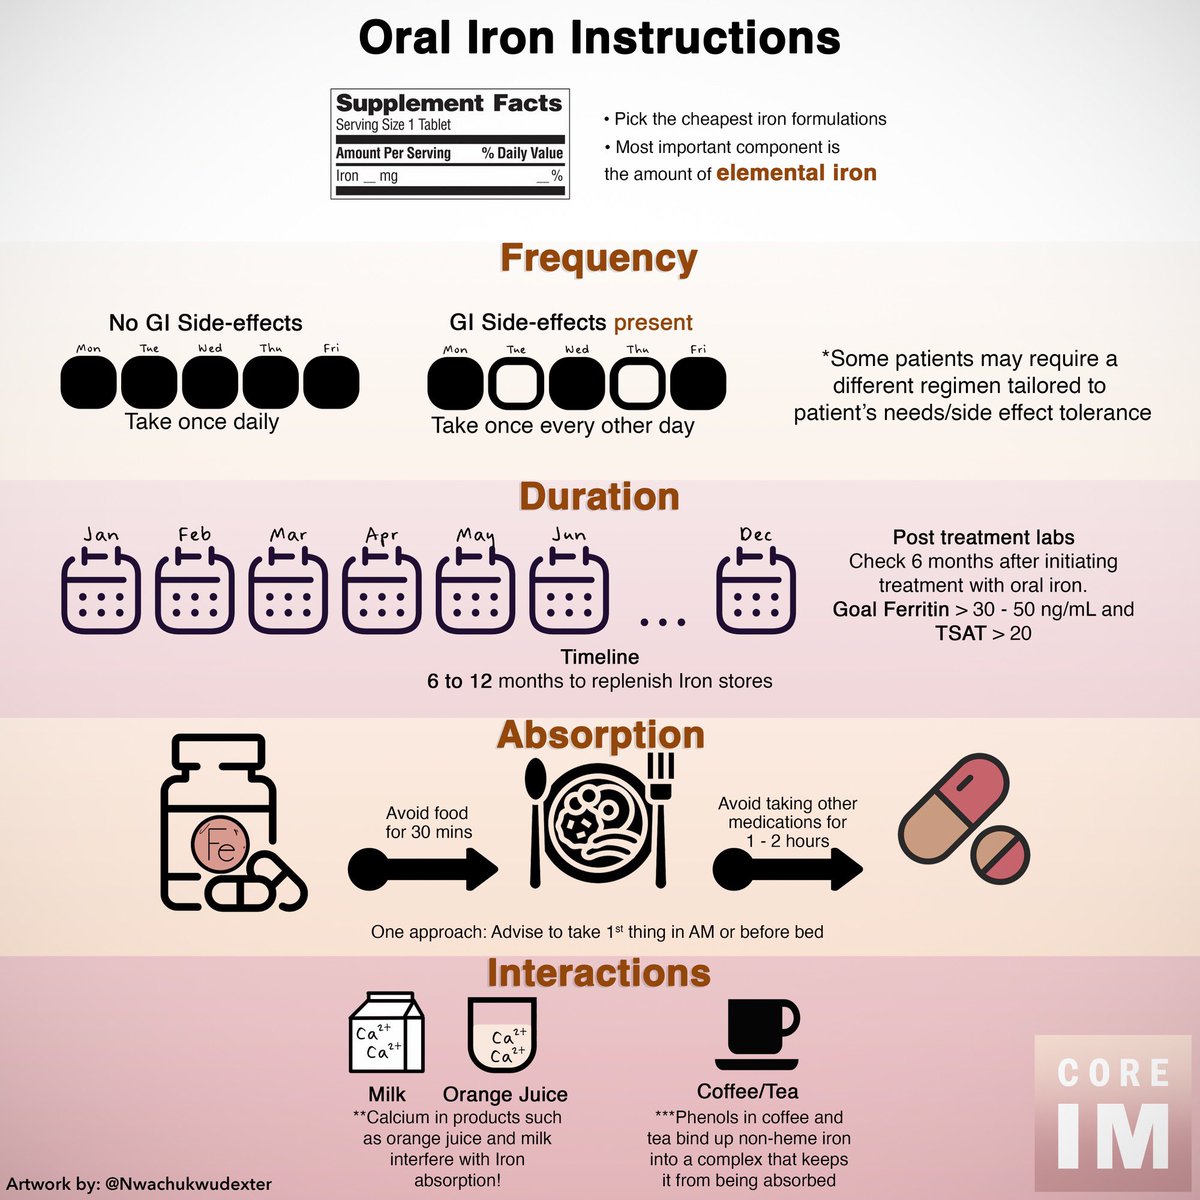 2/ Oral iron dosage considerations: - Frequency ⏰ - Duration 🗓️ - Absorption 🥛 - Side Effects 💩